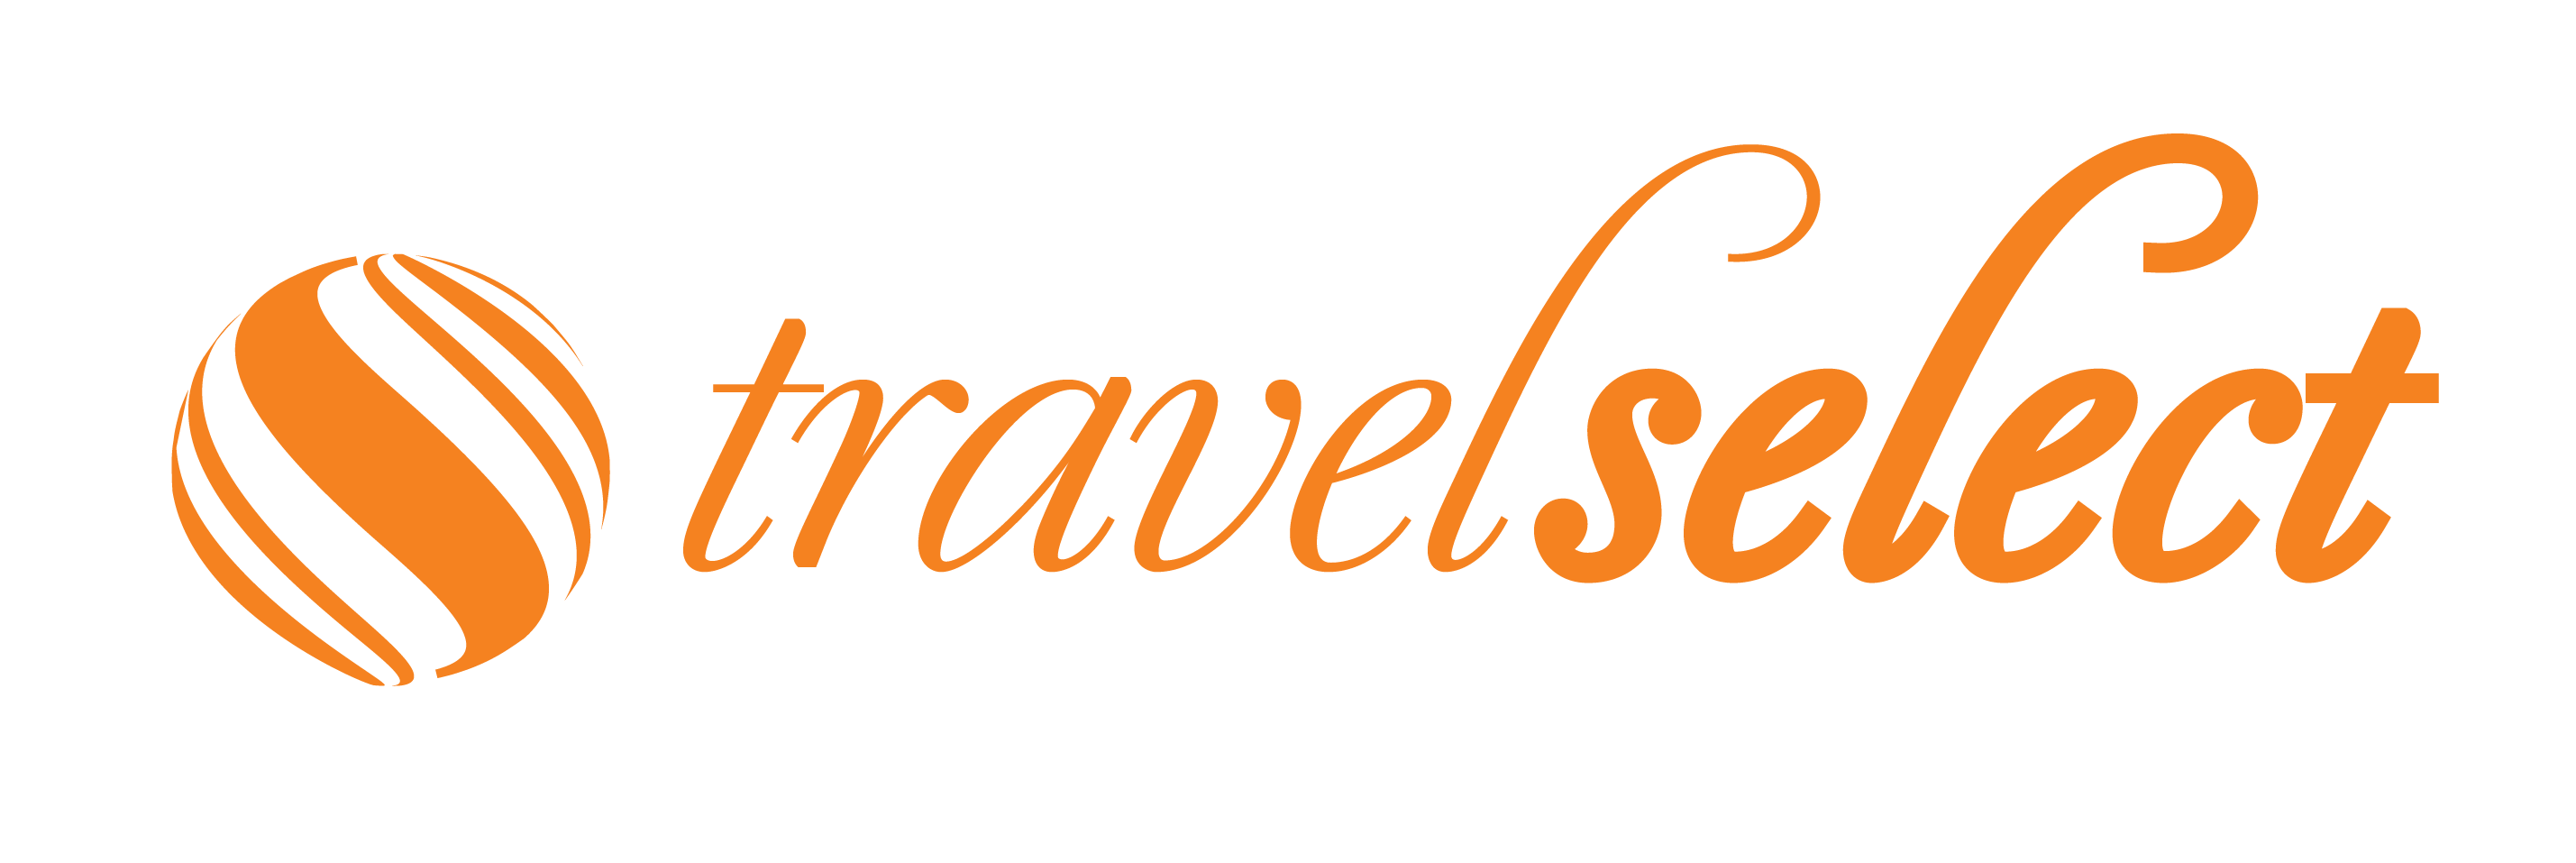 Travelselect